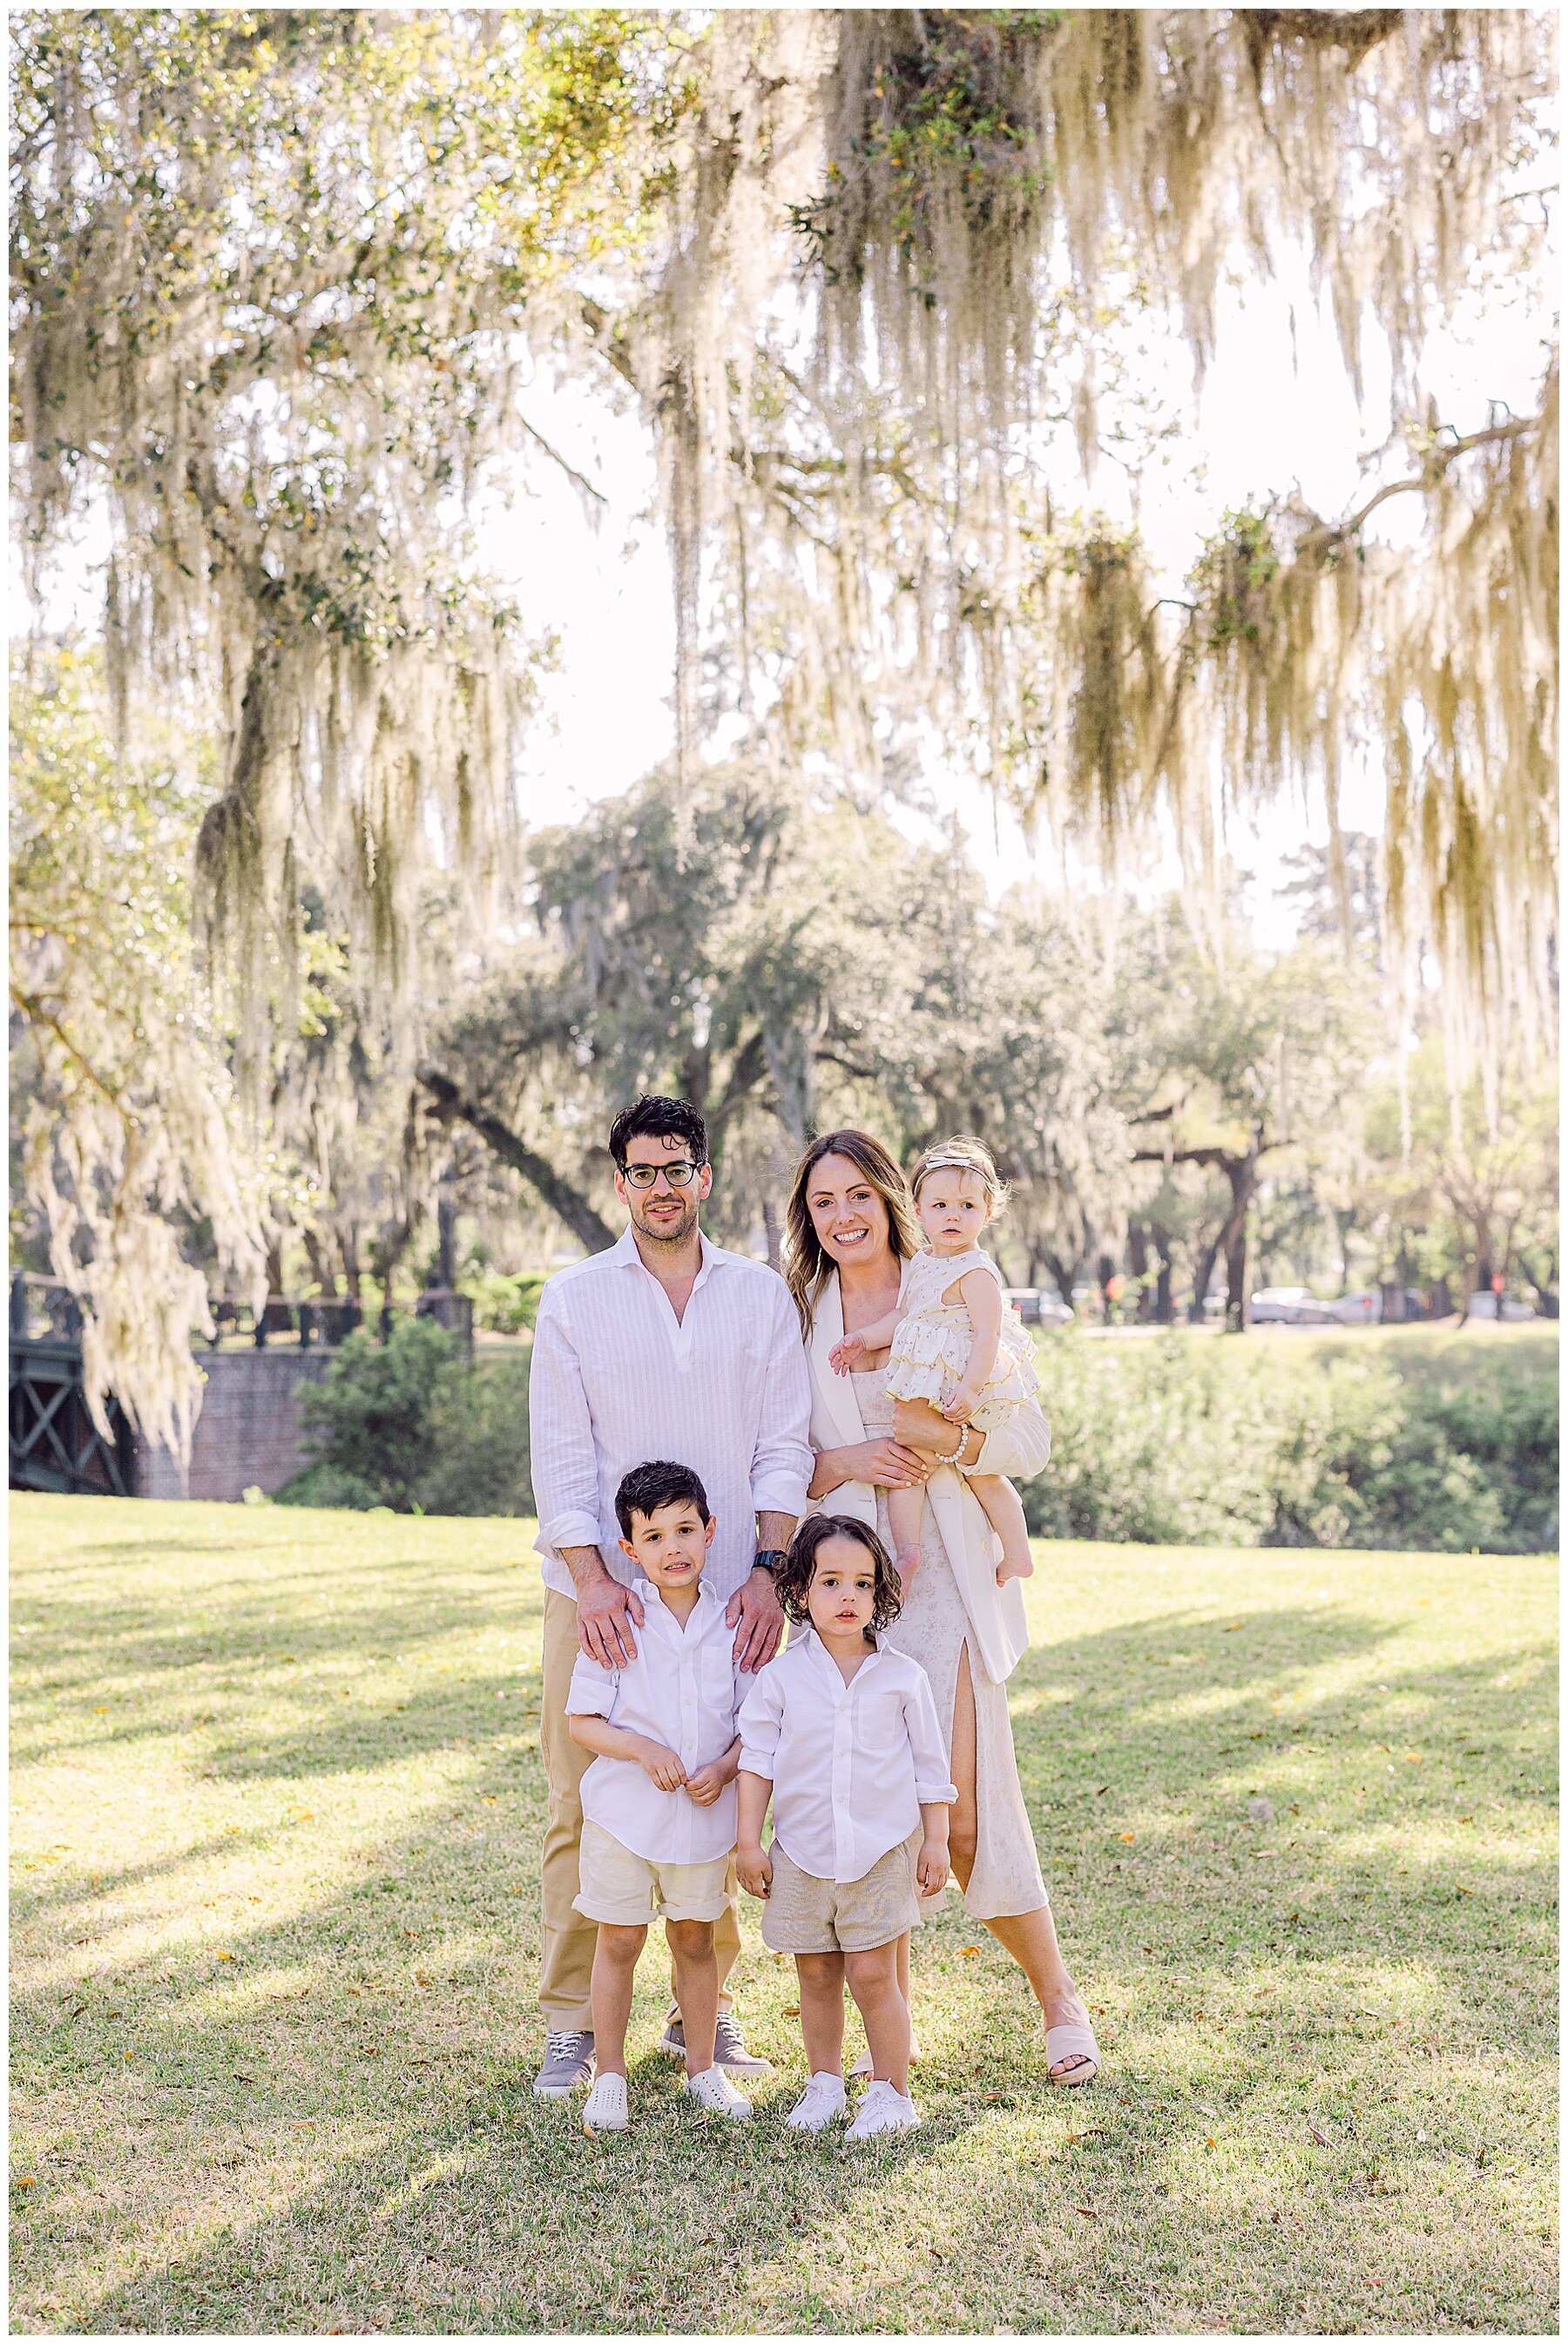 Katherine_Ives_Photography_Sallah_Palmetto_Bluff_Family_Session_19.JPG